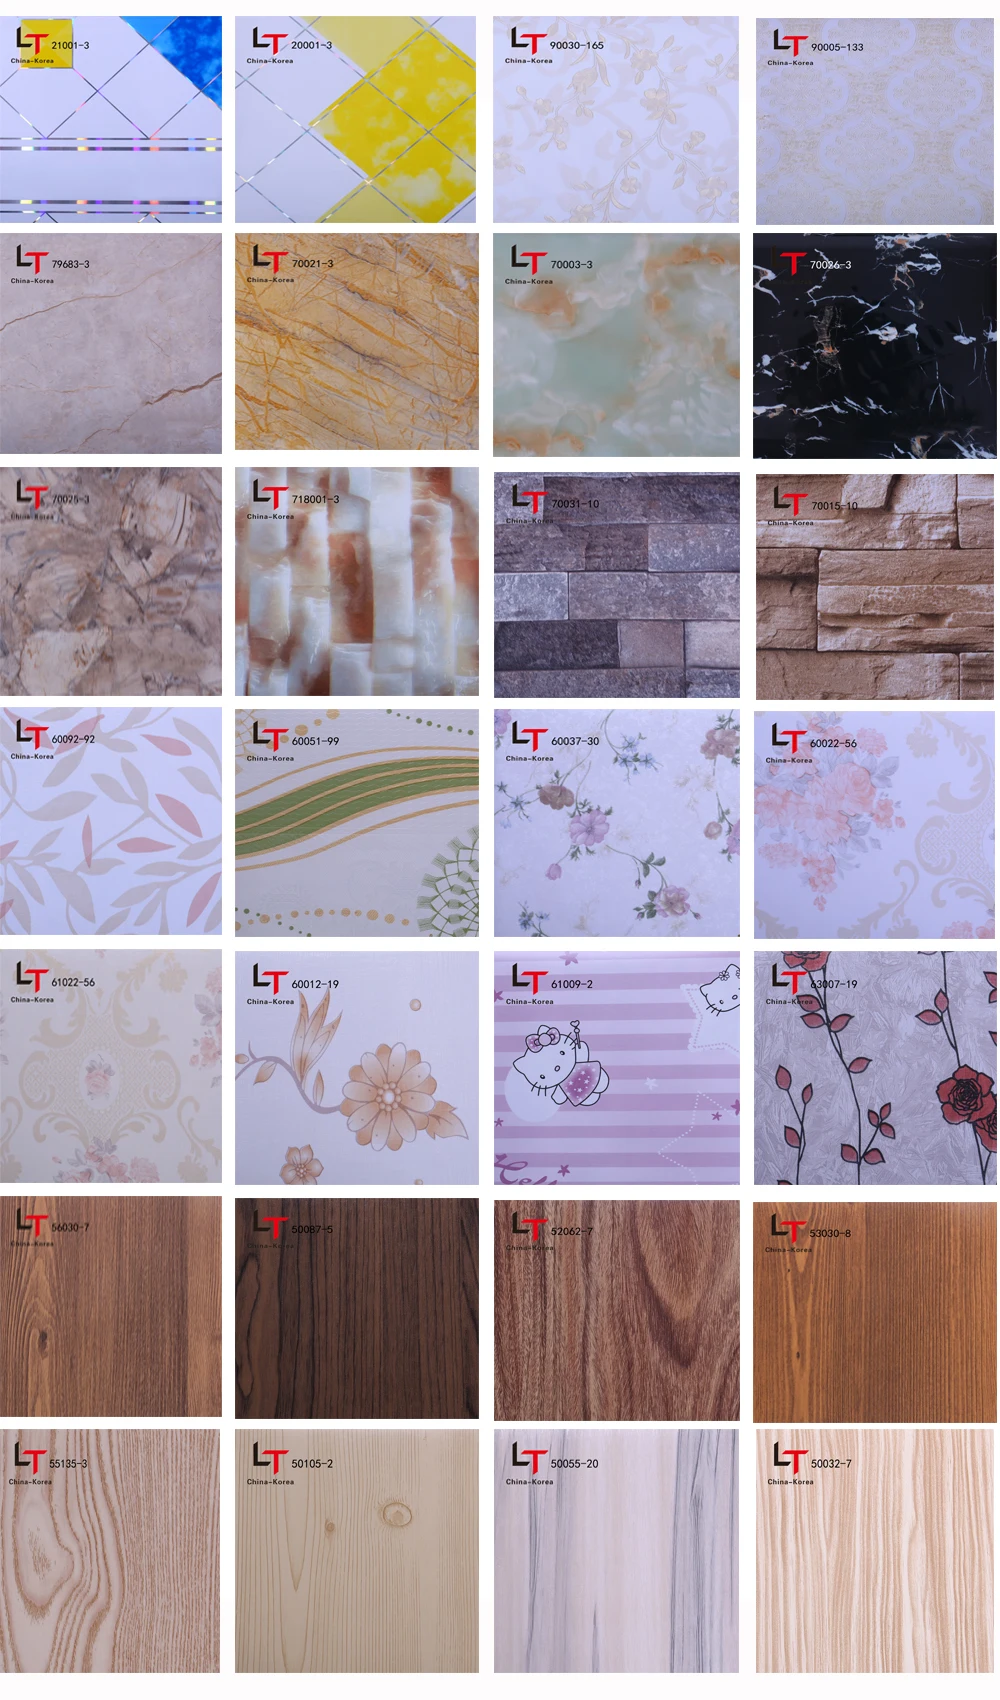 Self Adhesive 3d Wallpaper Borders Homebase Wallpaper Film In China - Buy  Self Adhesive Wallpaper Borders Homebase,Interior 3d Self Adhesive Paper, Wallpaper Film In Haining City Product on 